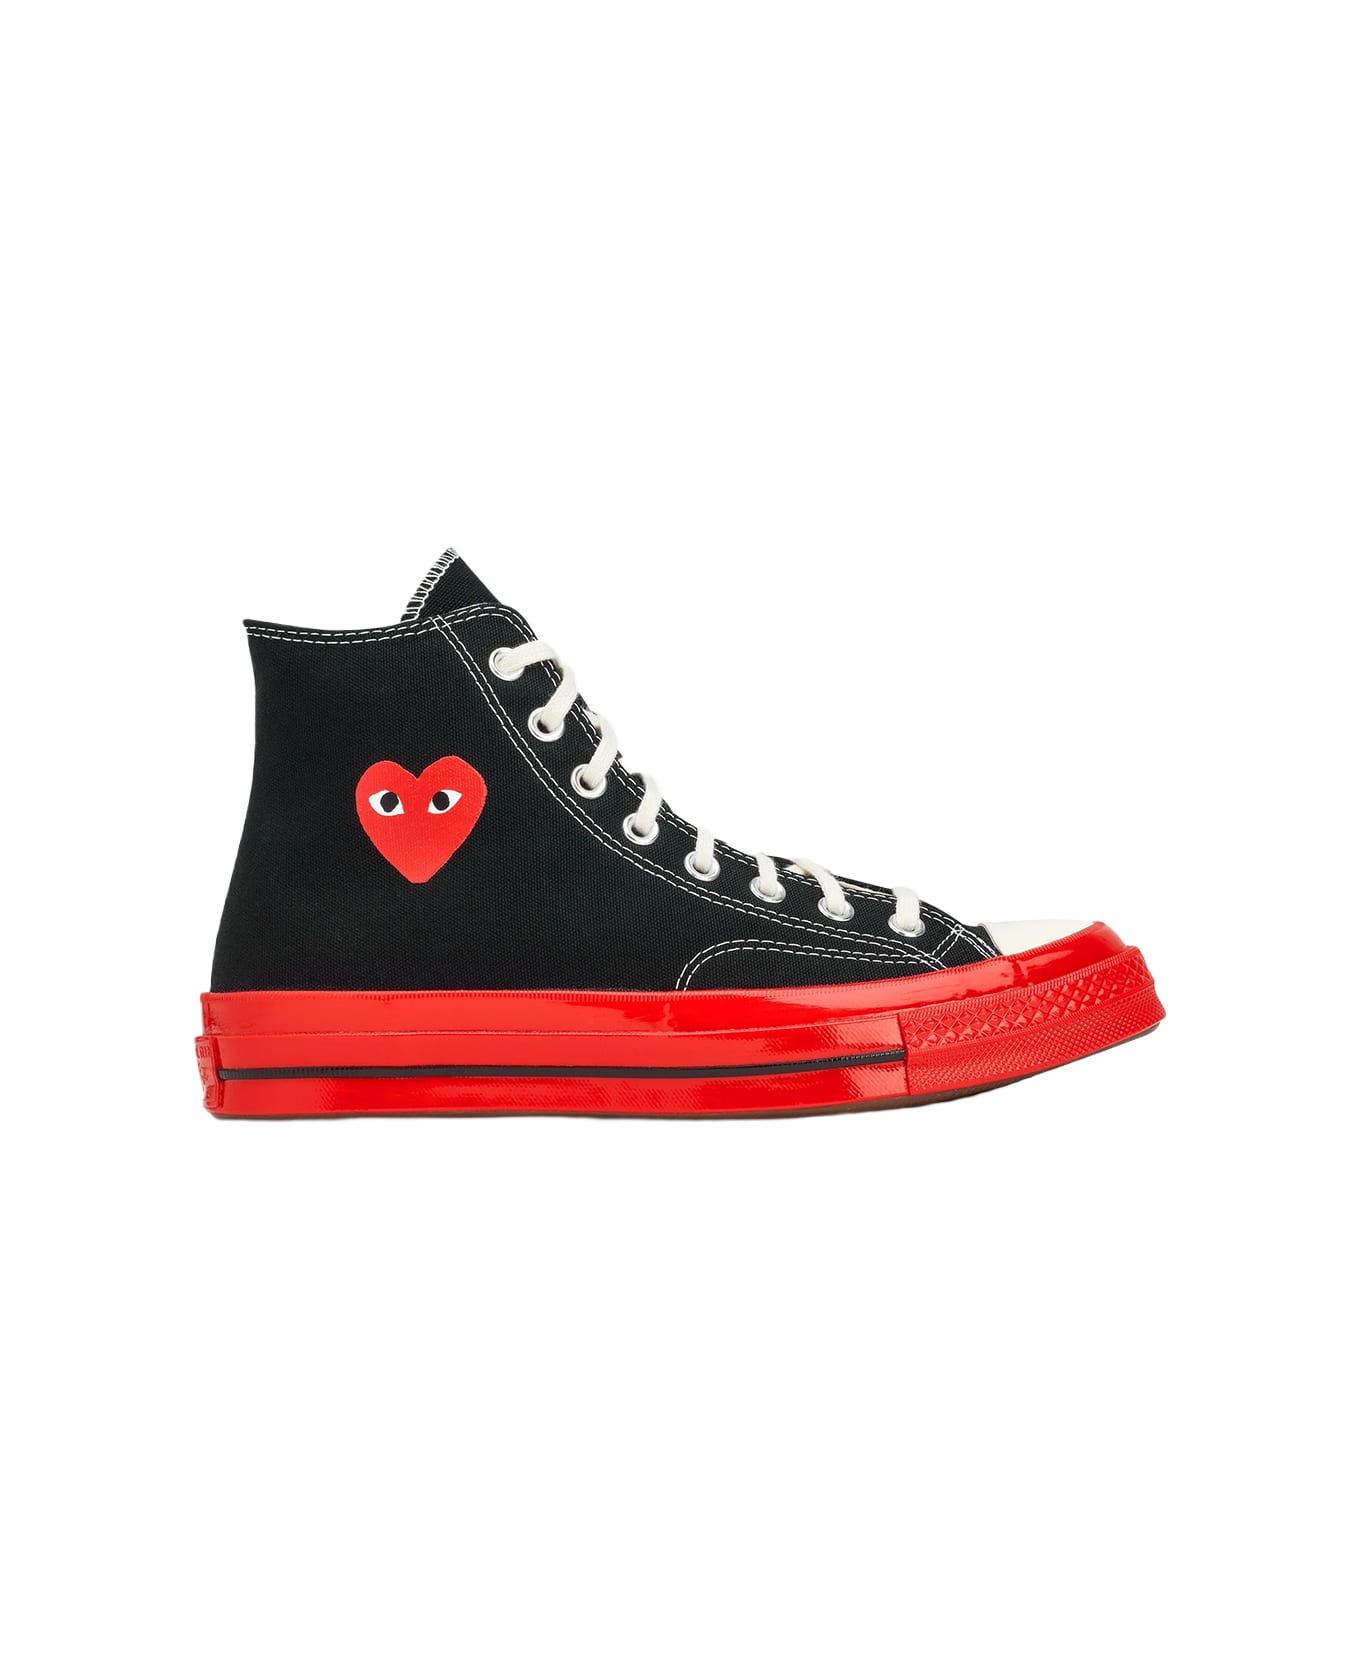 Comme des Garçons Play Ct70 Hi Top Red Sole Shoes Converse collaboration Chuck Taylor 70s black canvas sneaker with red sole. - Nero スニーカー